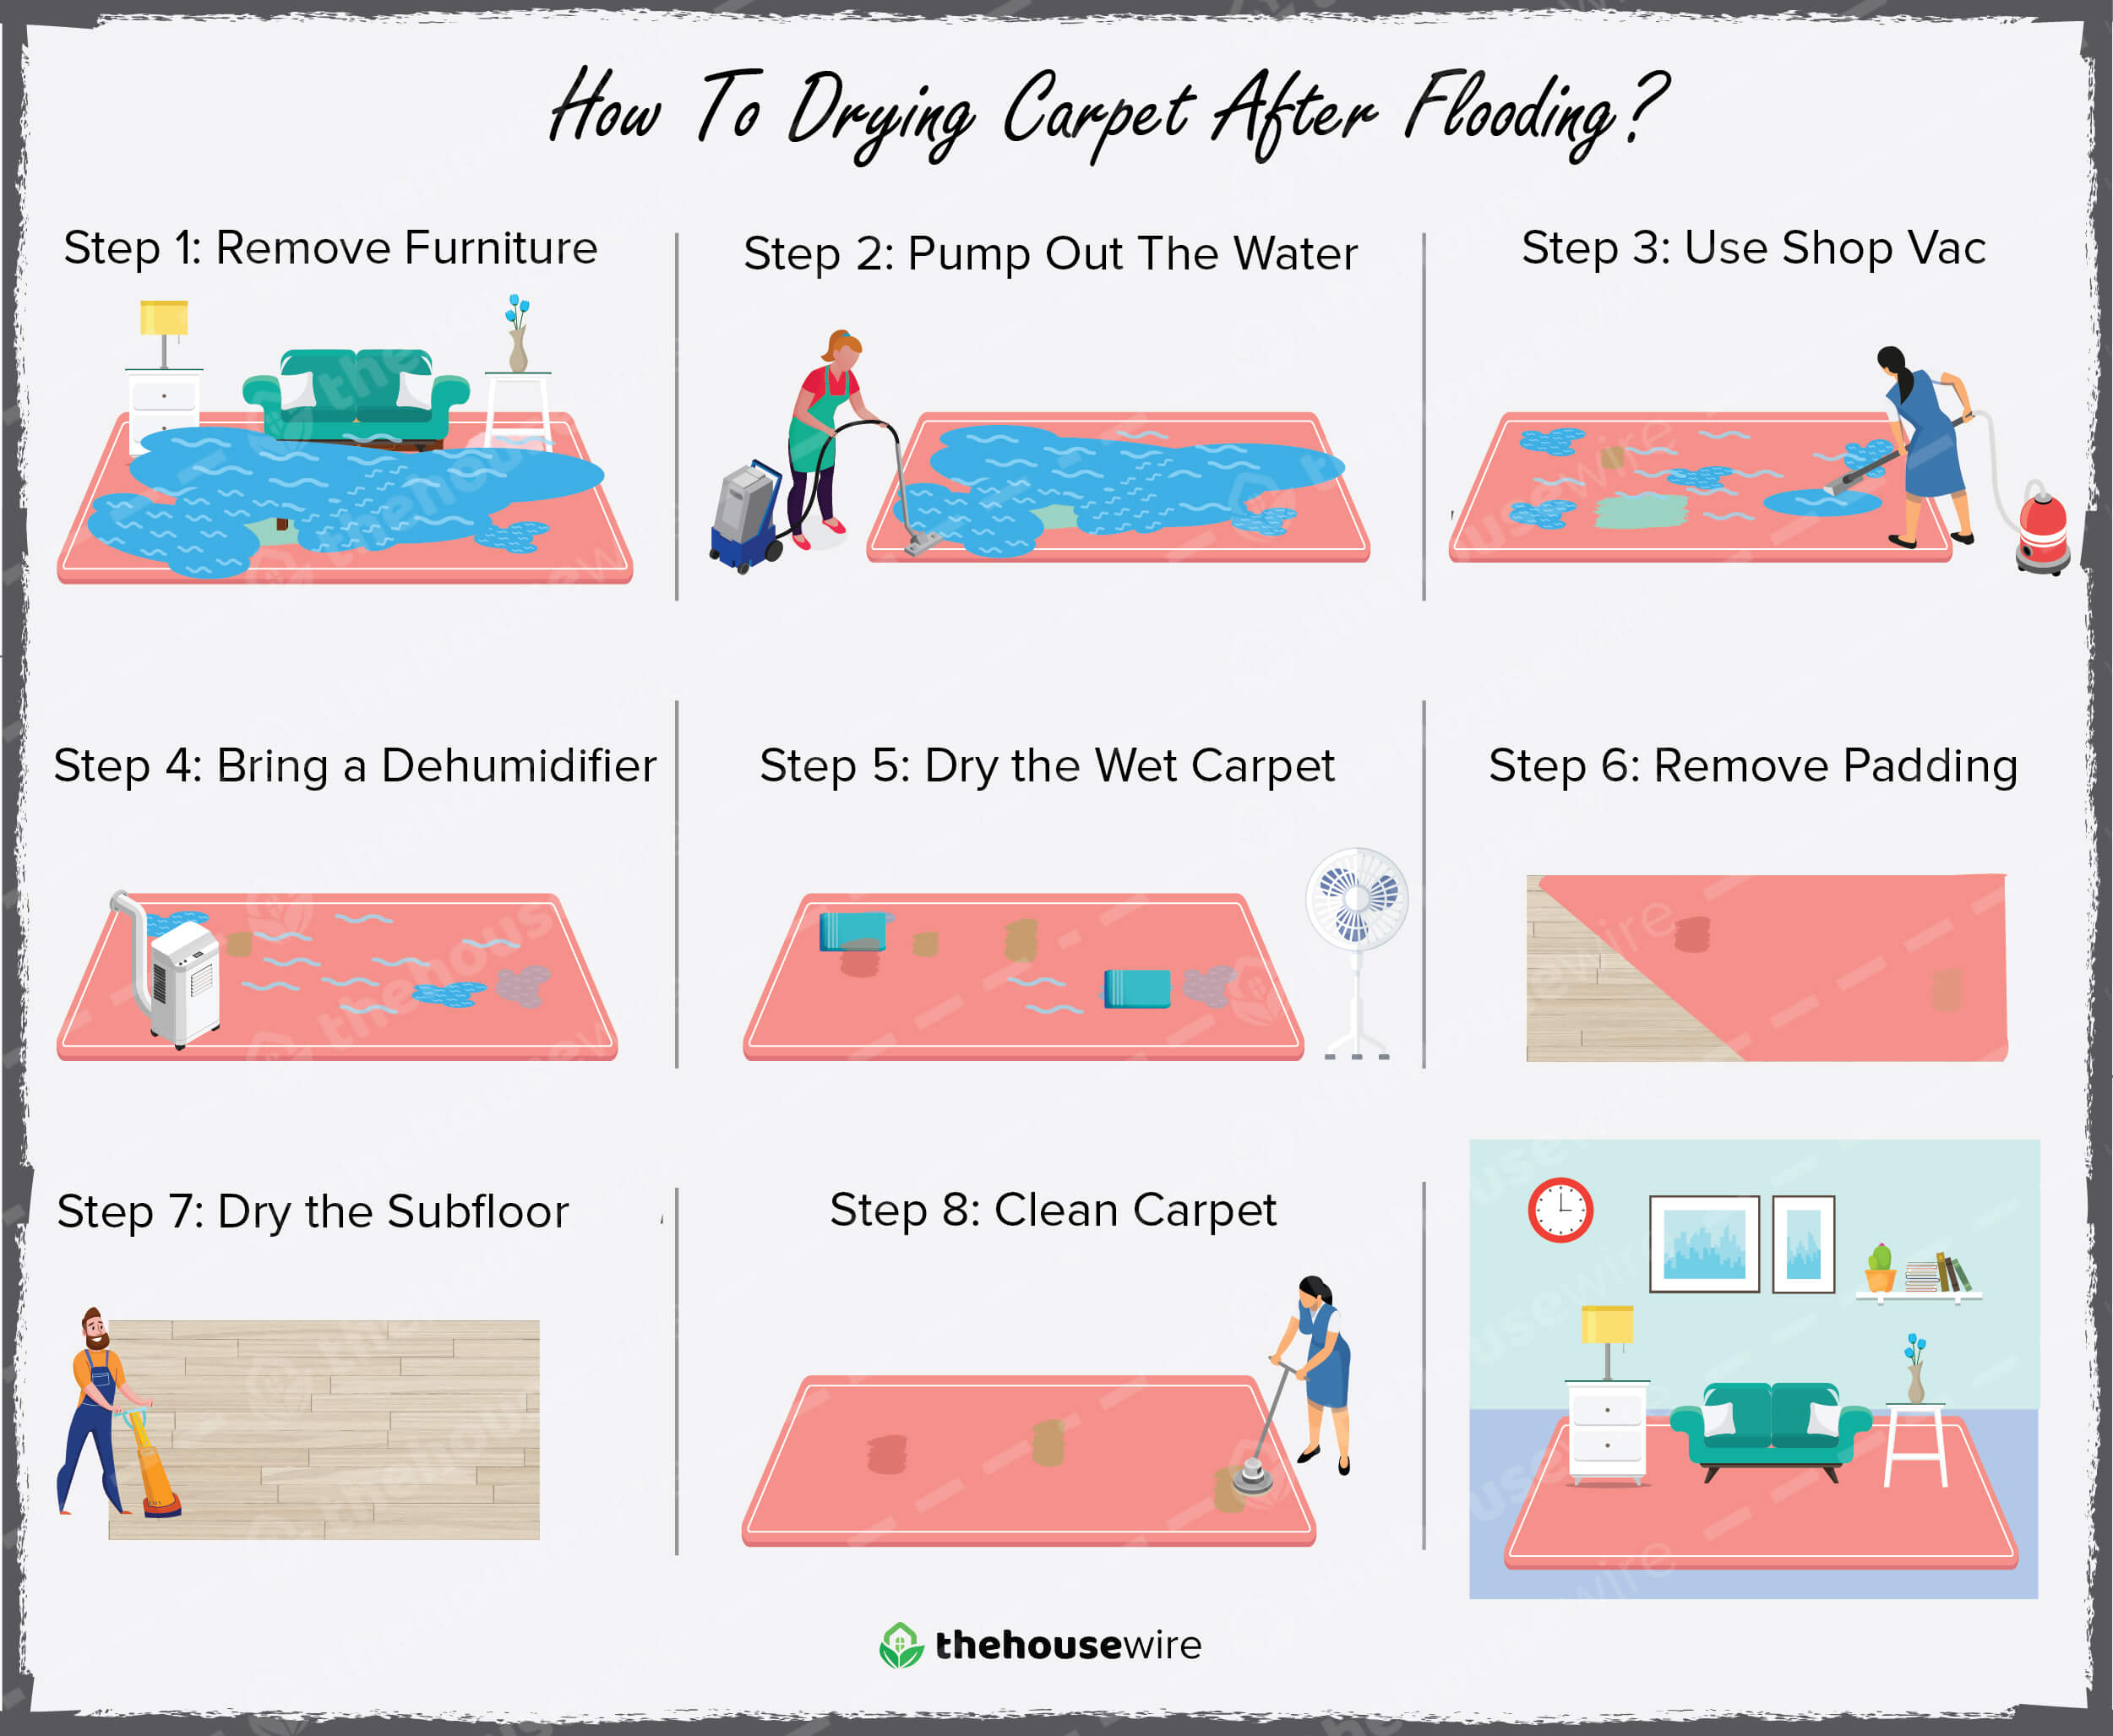 how long for carpet to dry after cleaning